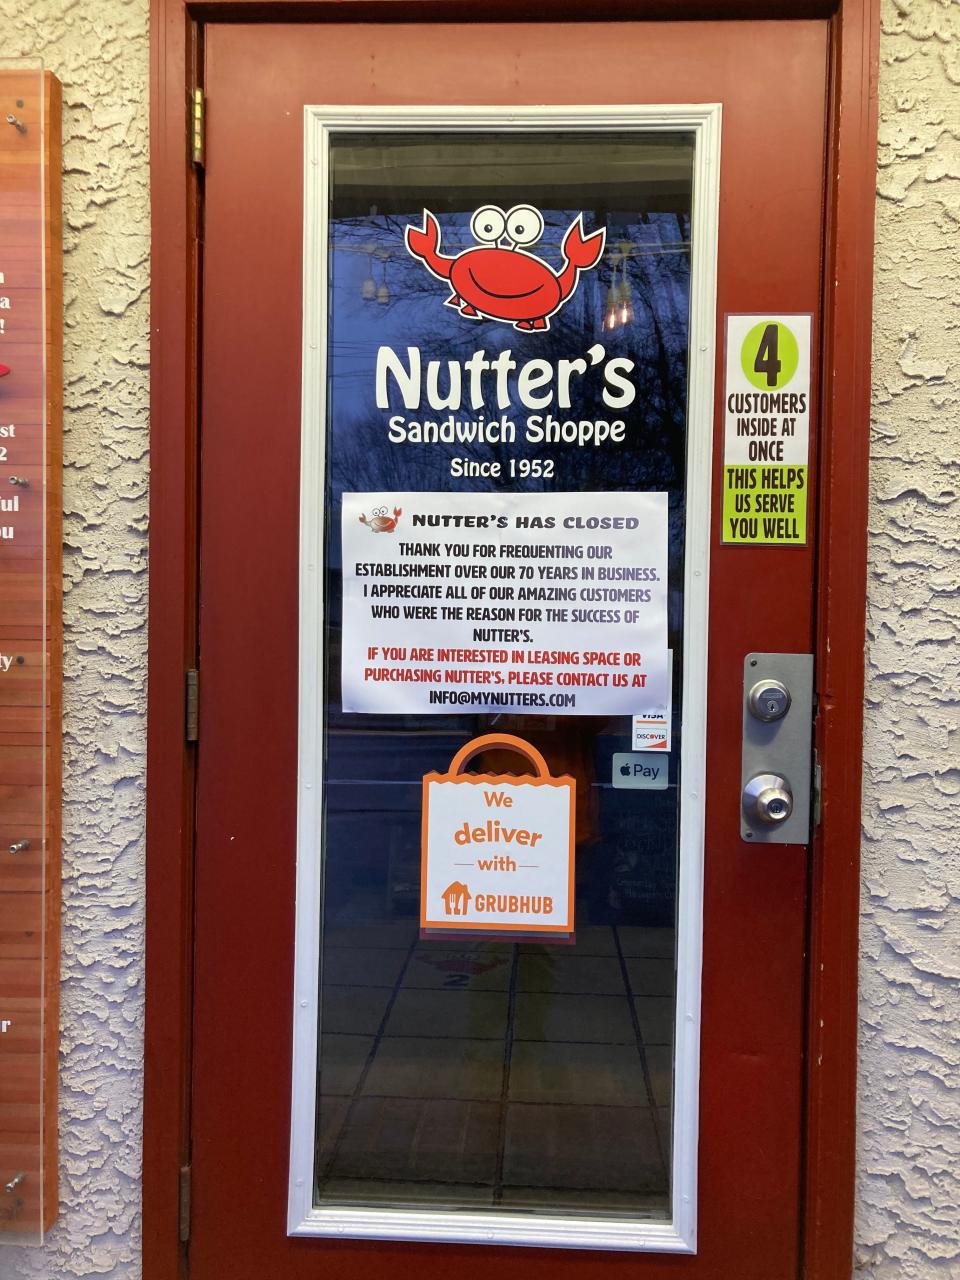 A message posted to the door at Nutter's in Newark announces its closure. The owners are soliciting offers to take over the business or lease the space.